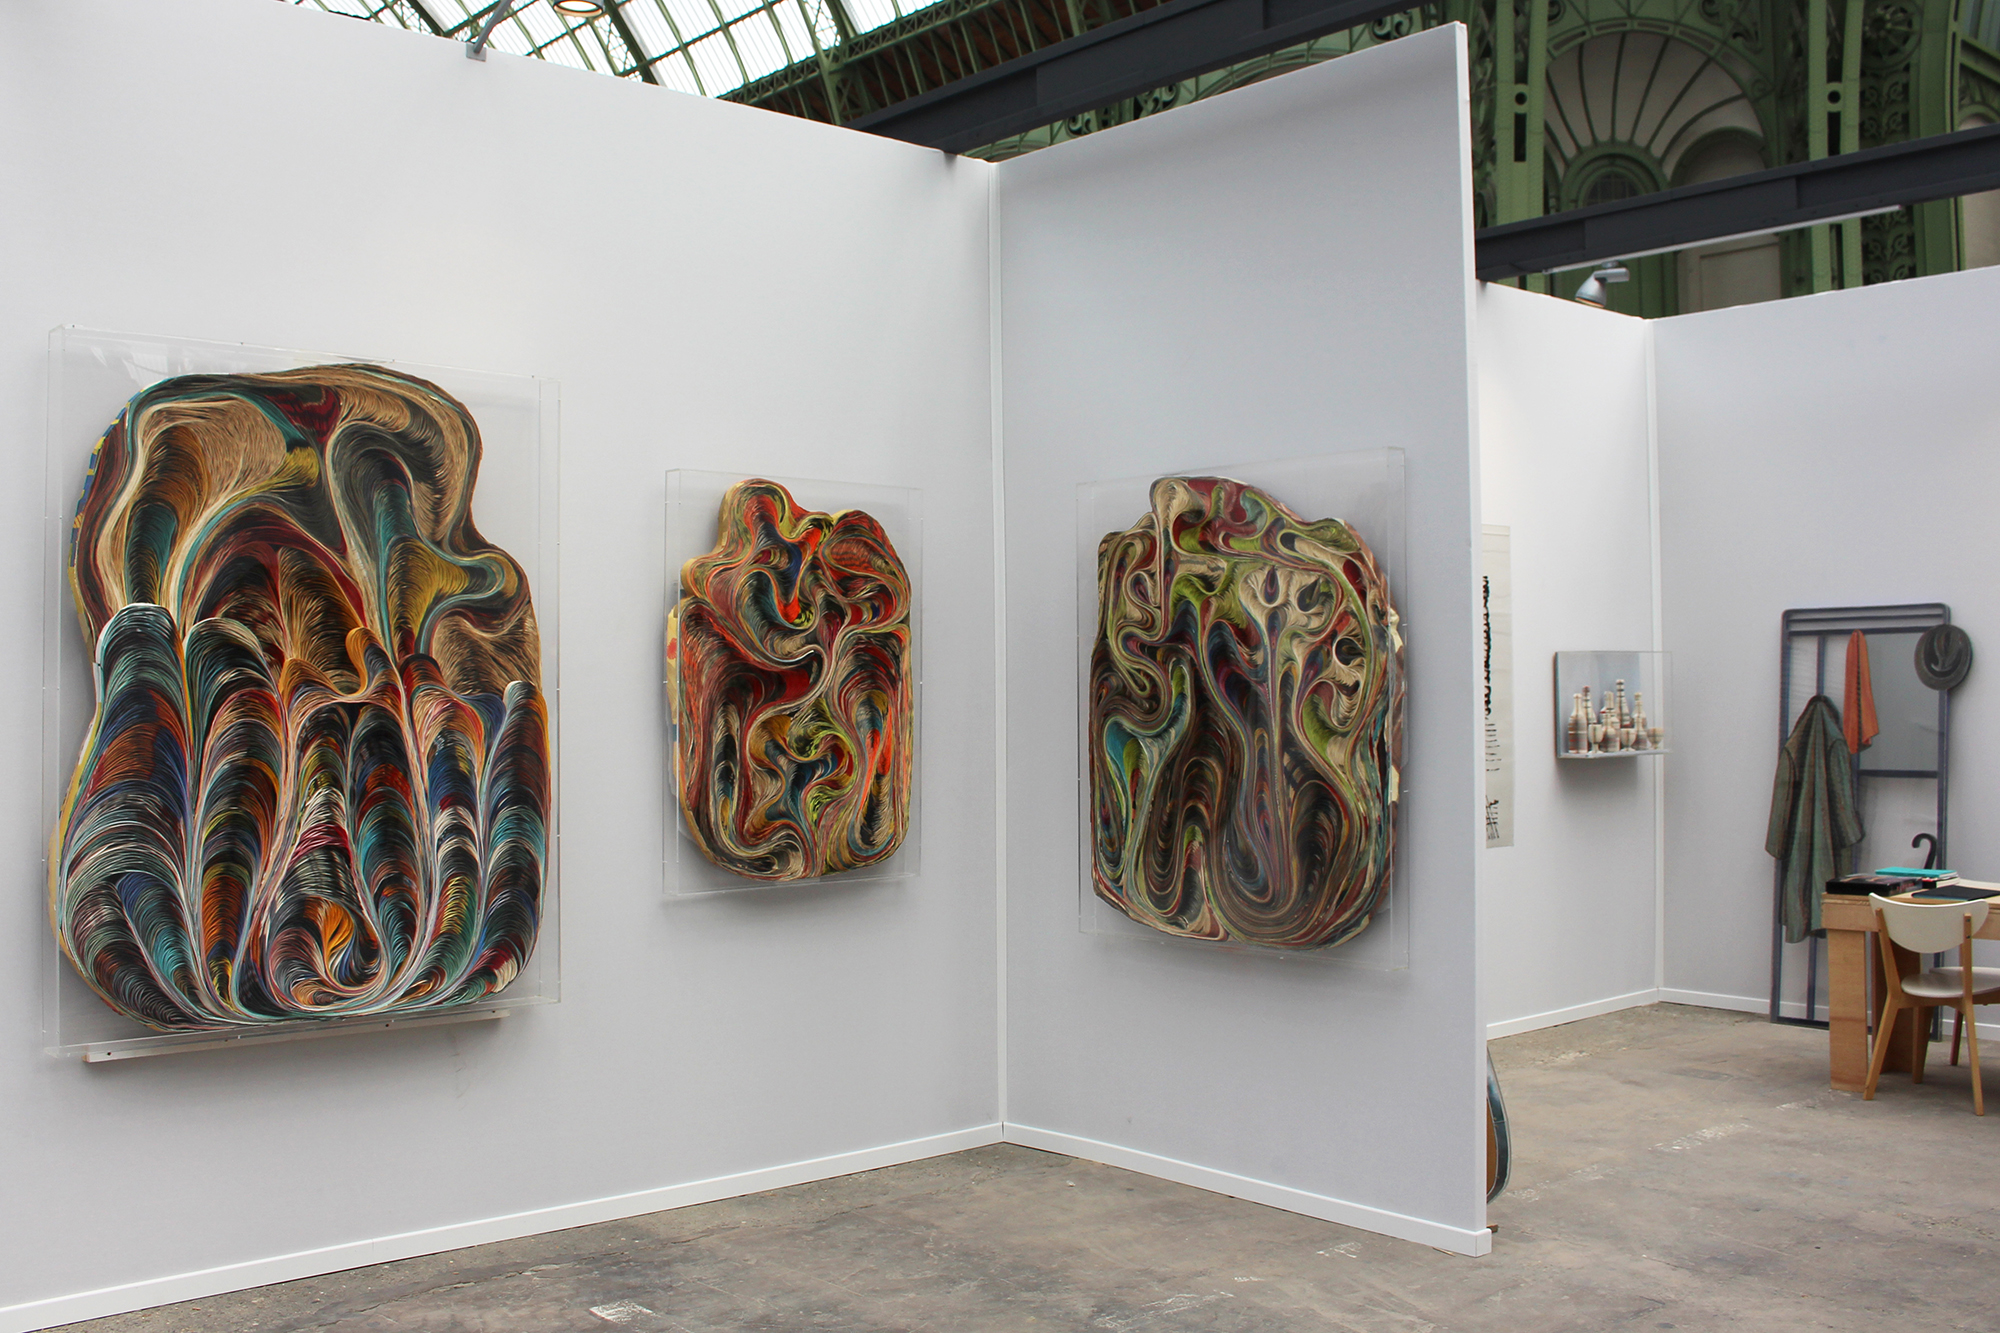 Sobering Galerie at Art Paris Art Fair (booth E13), exhibition view, March 30th - April 2nd 2017, Pavlos' Baroque series (1966)